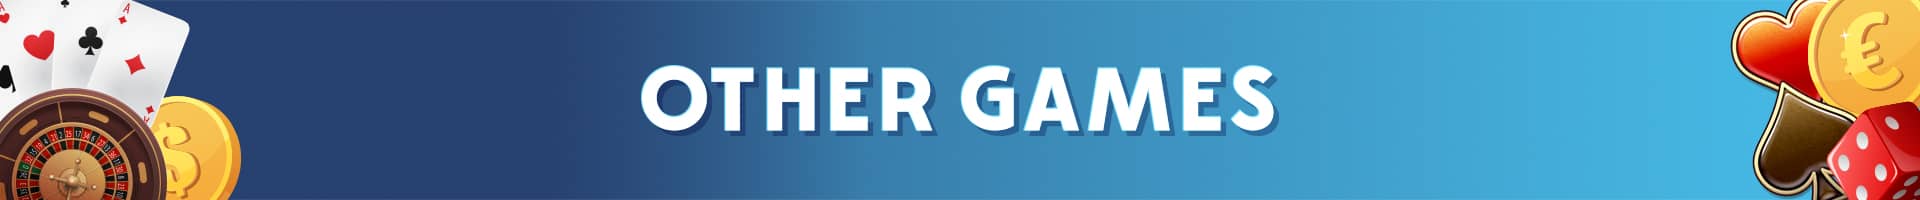 Other Games banner